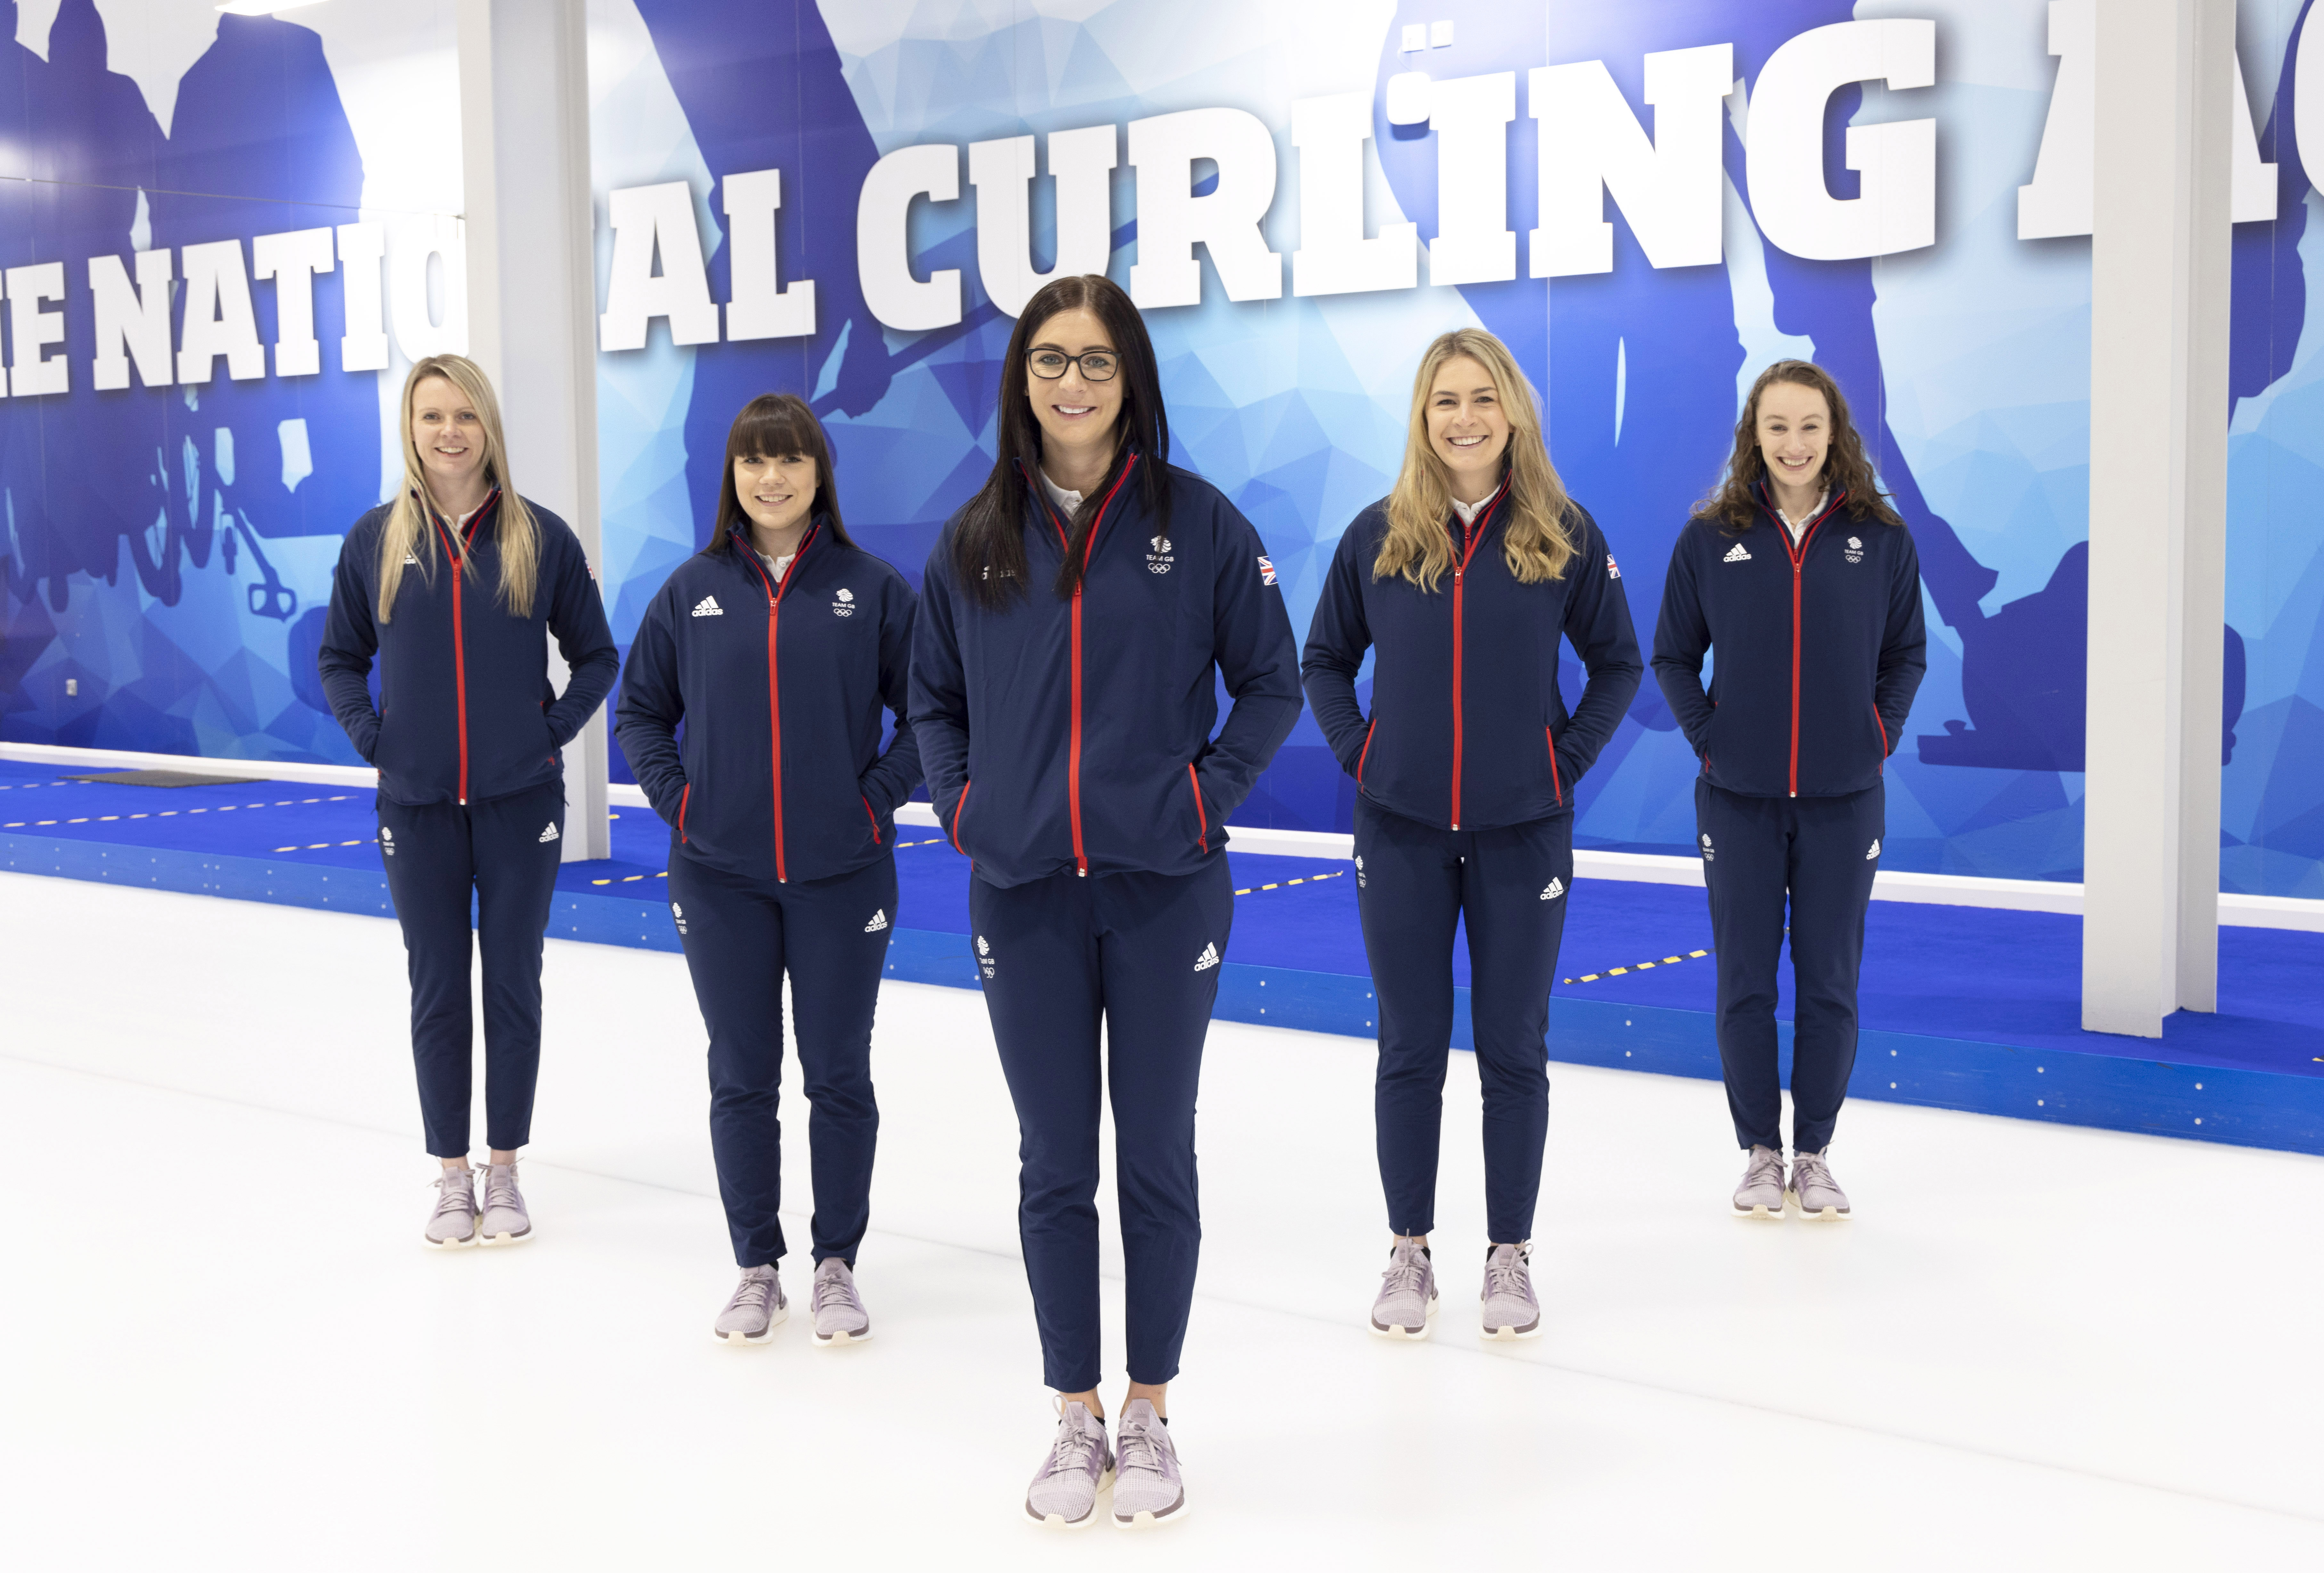 2022-23 USA CURLING NATIONAL TEAM ROSTER — USA CURLING